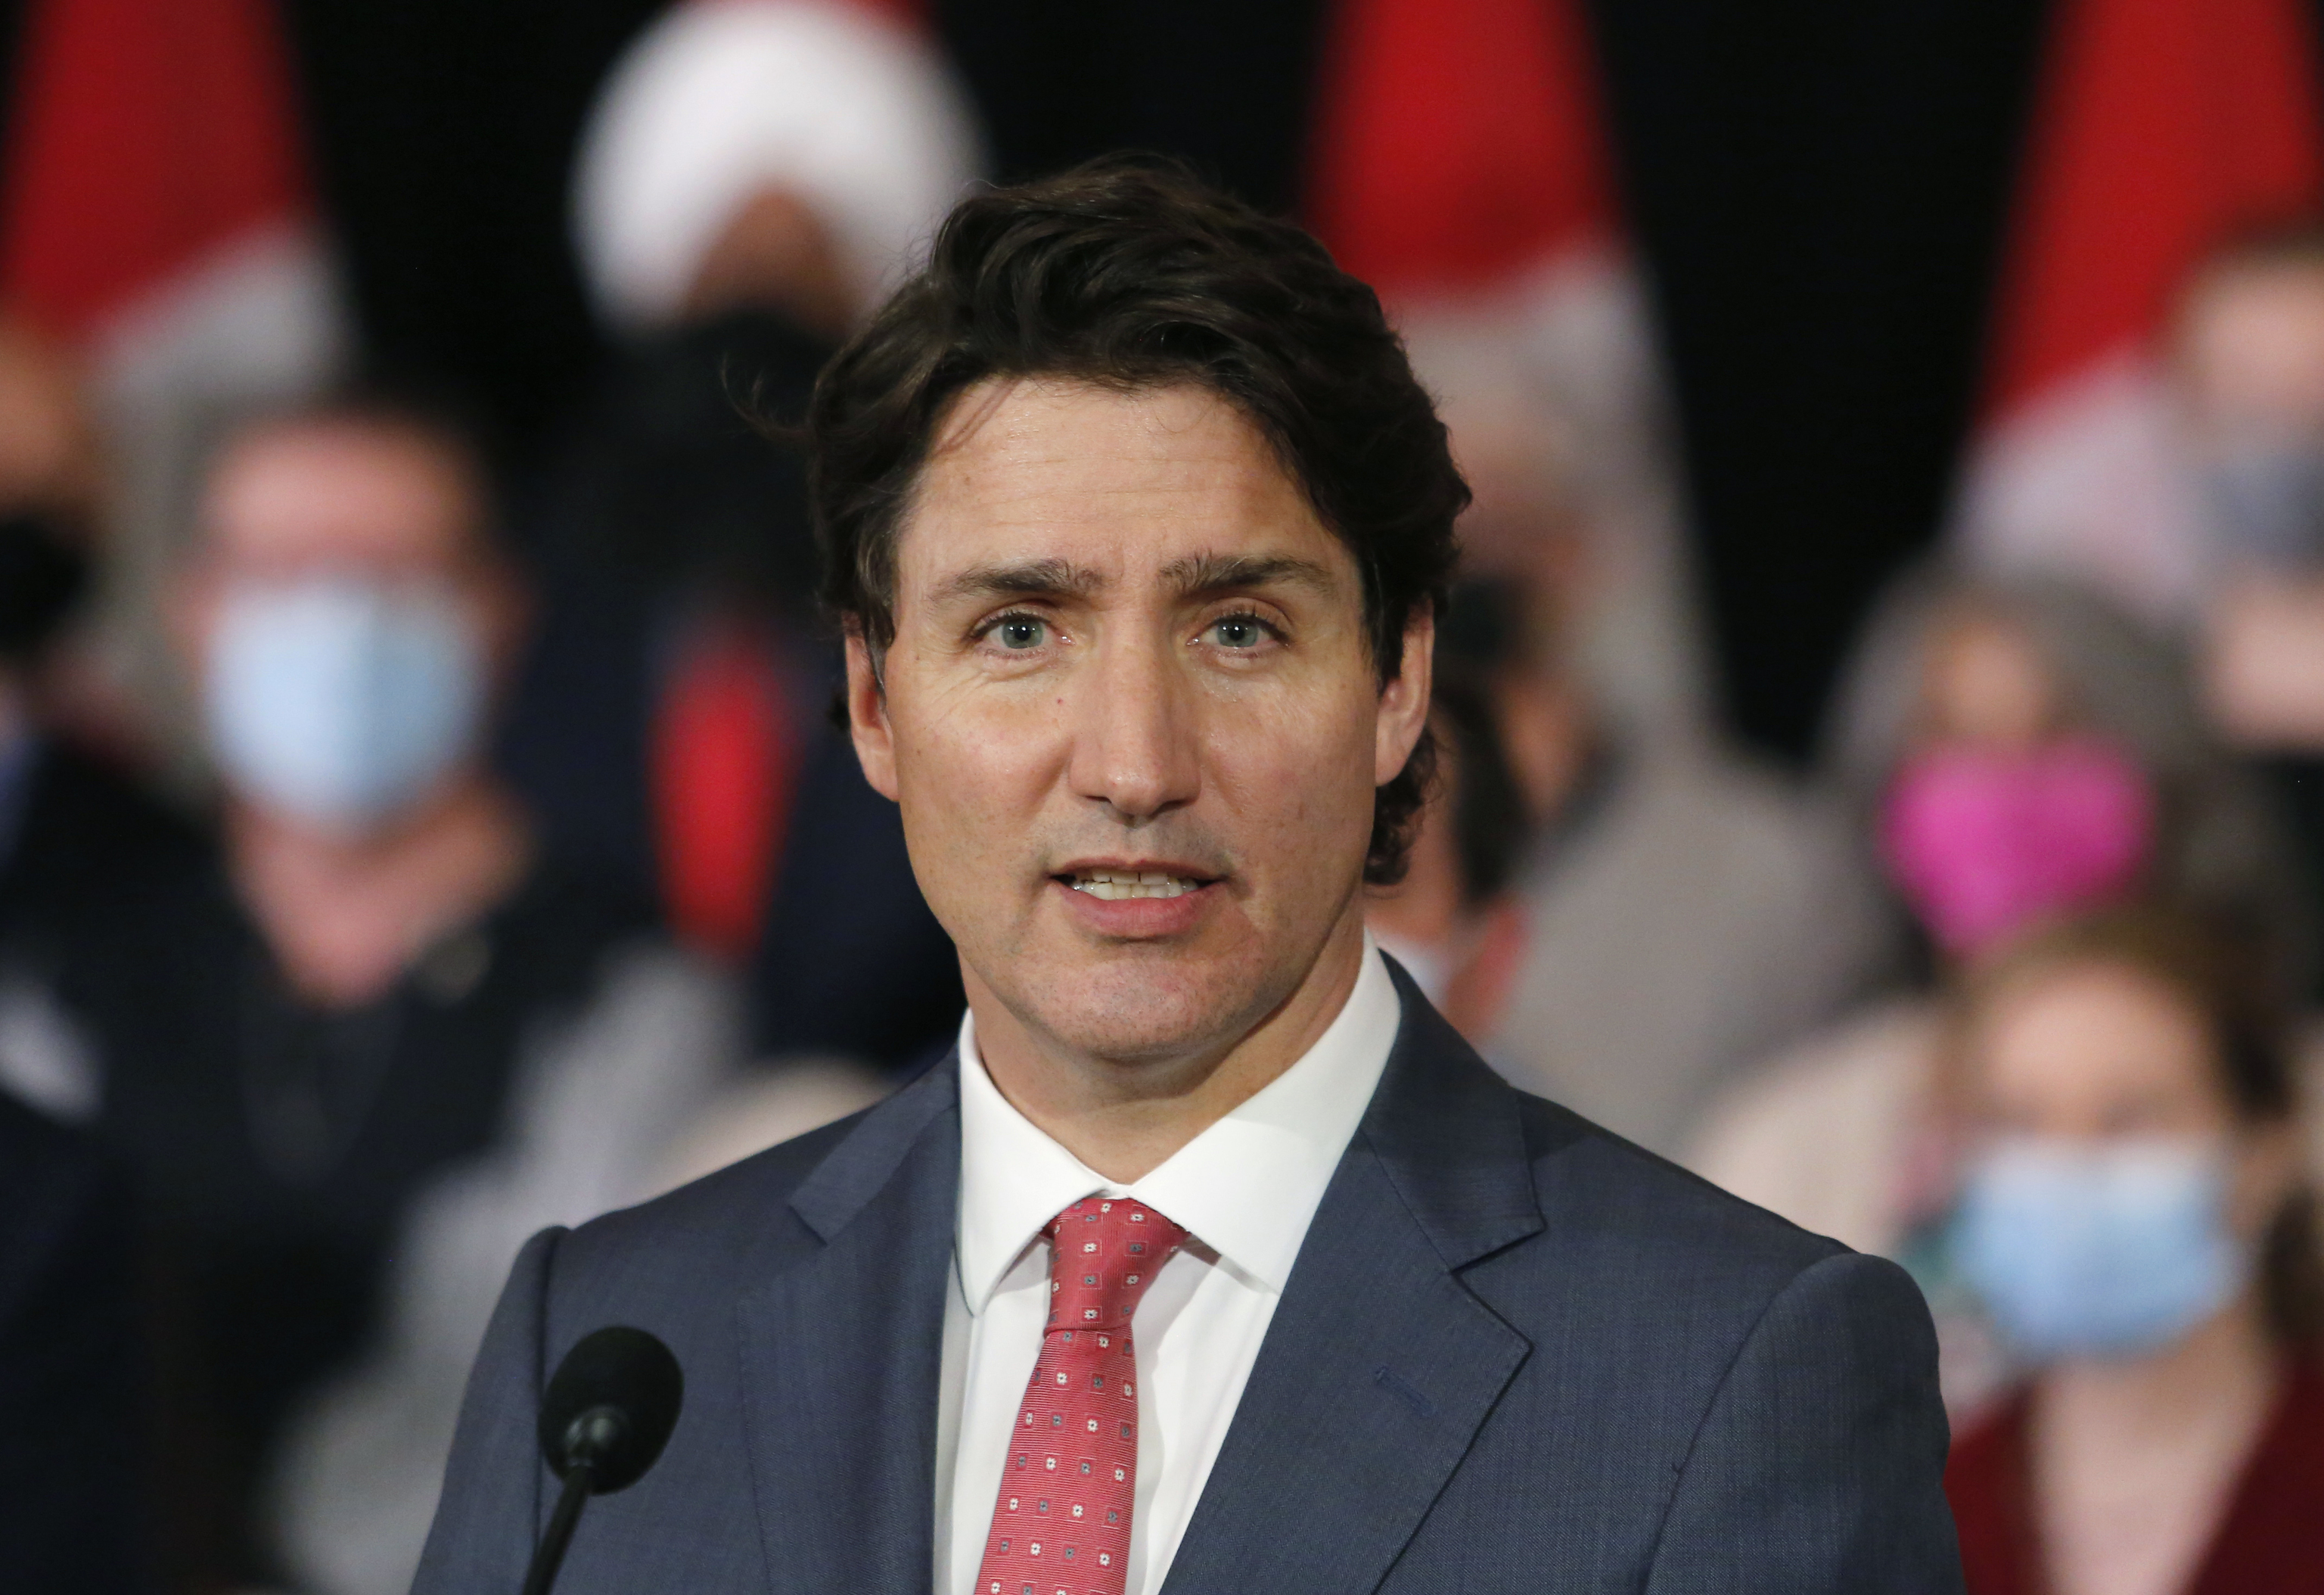 Canadian Prime Minister Justin Trudeau announced new gun laws.